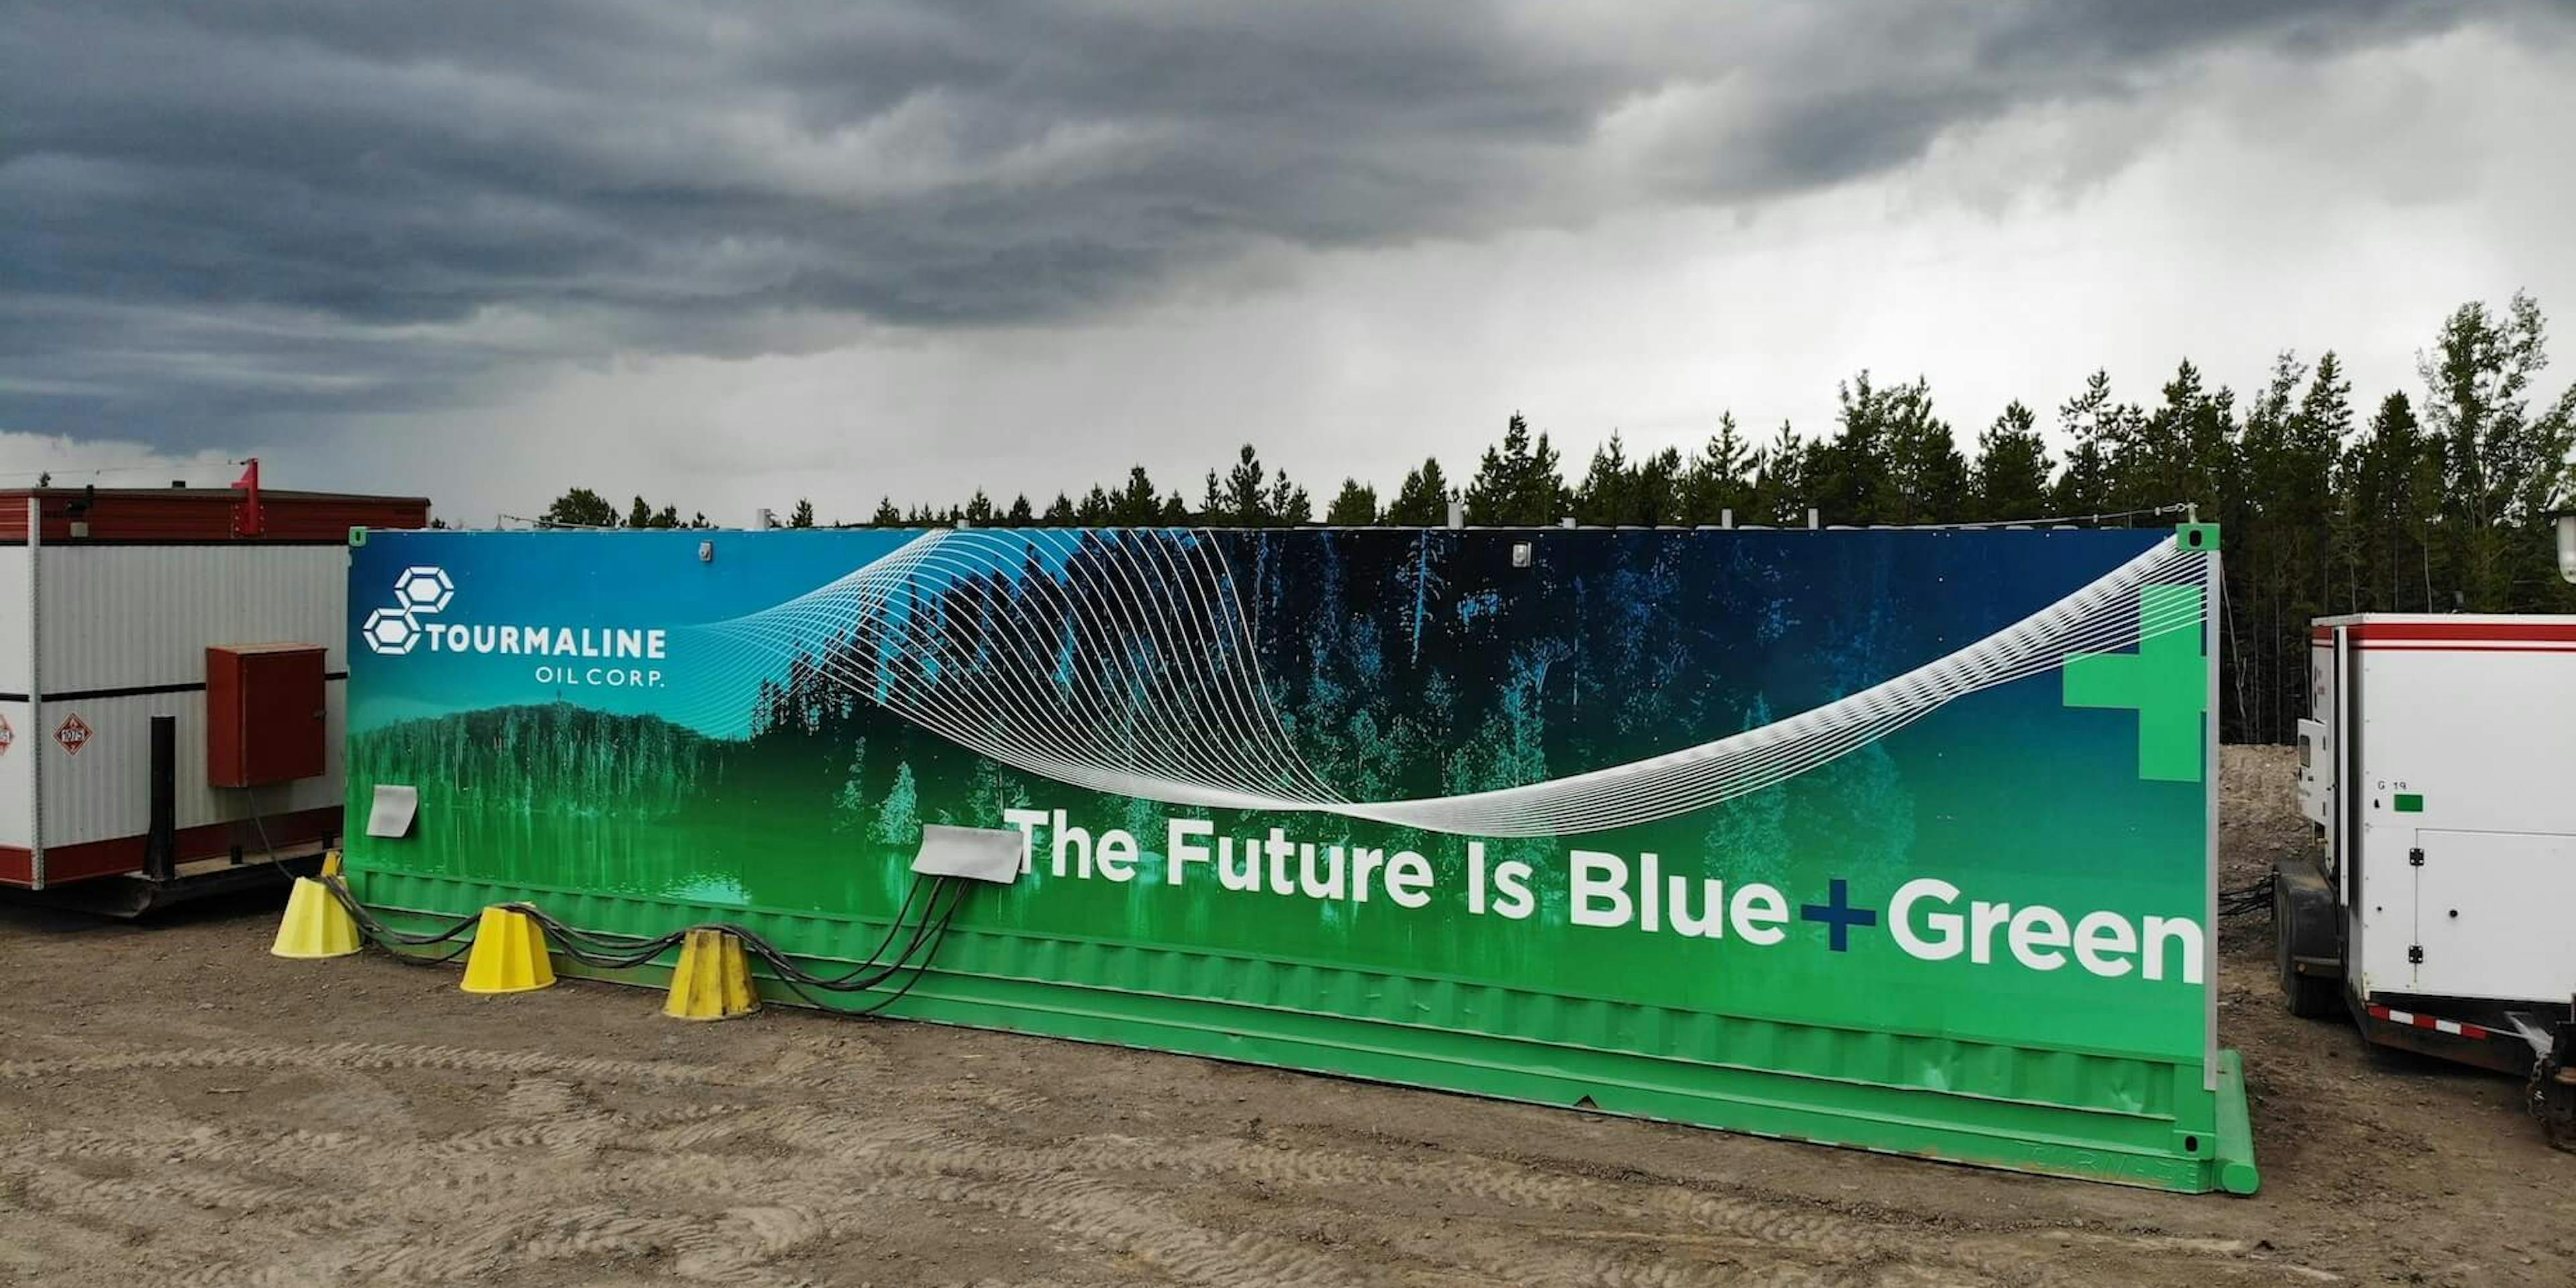 A large sign reading 'Tourmaline Oil Corp: The Future is Blue + Green' with stormclouds in the background.